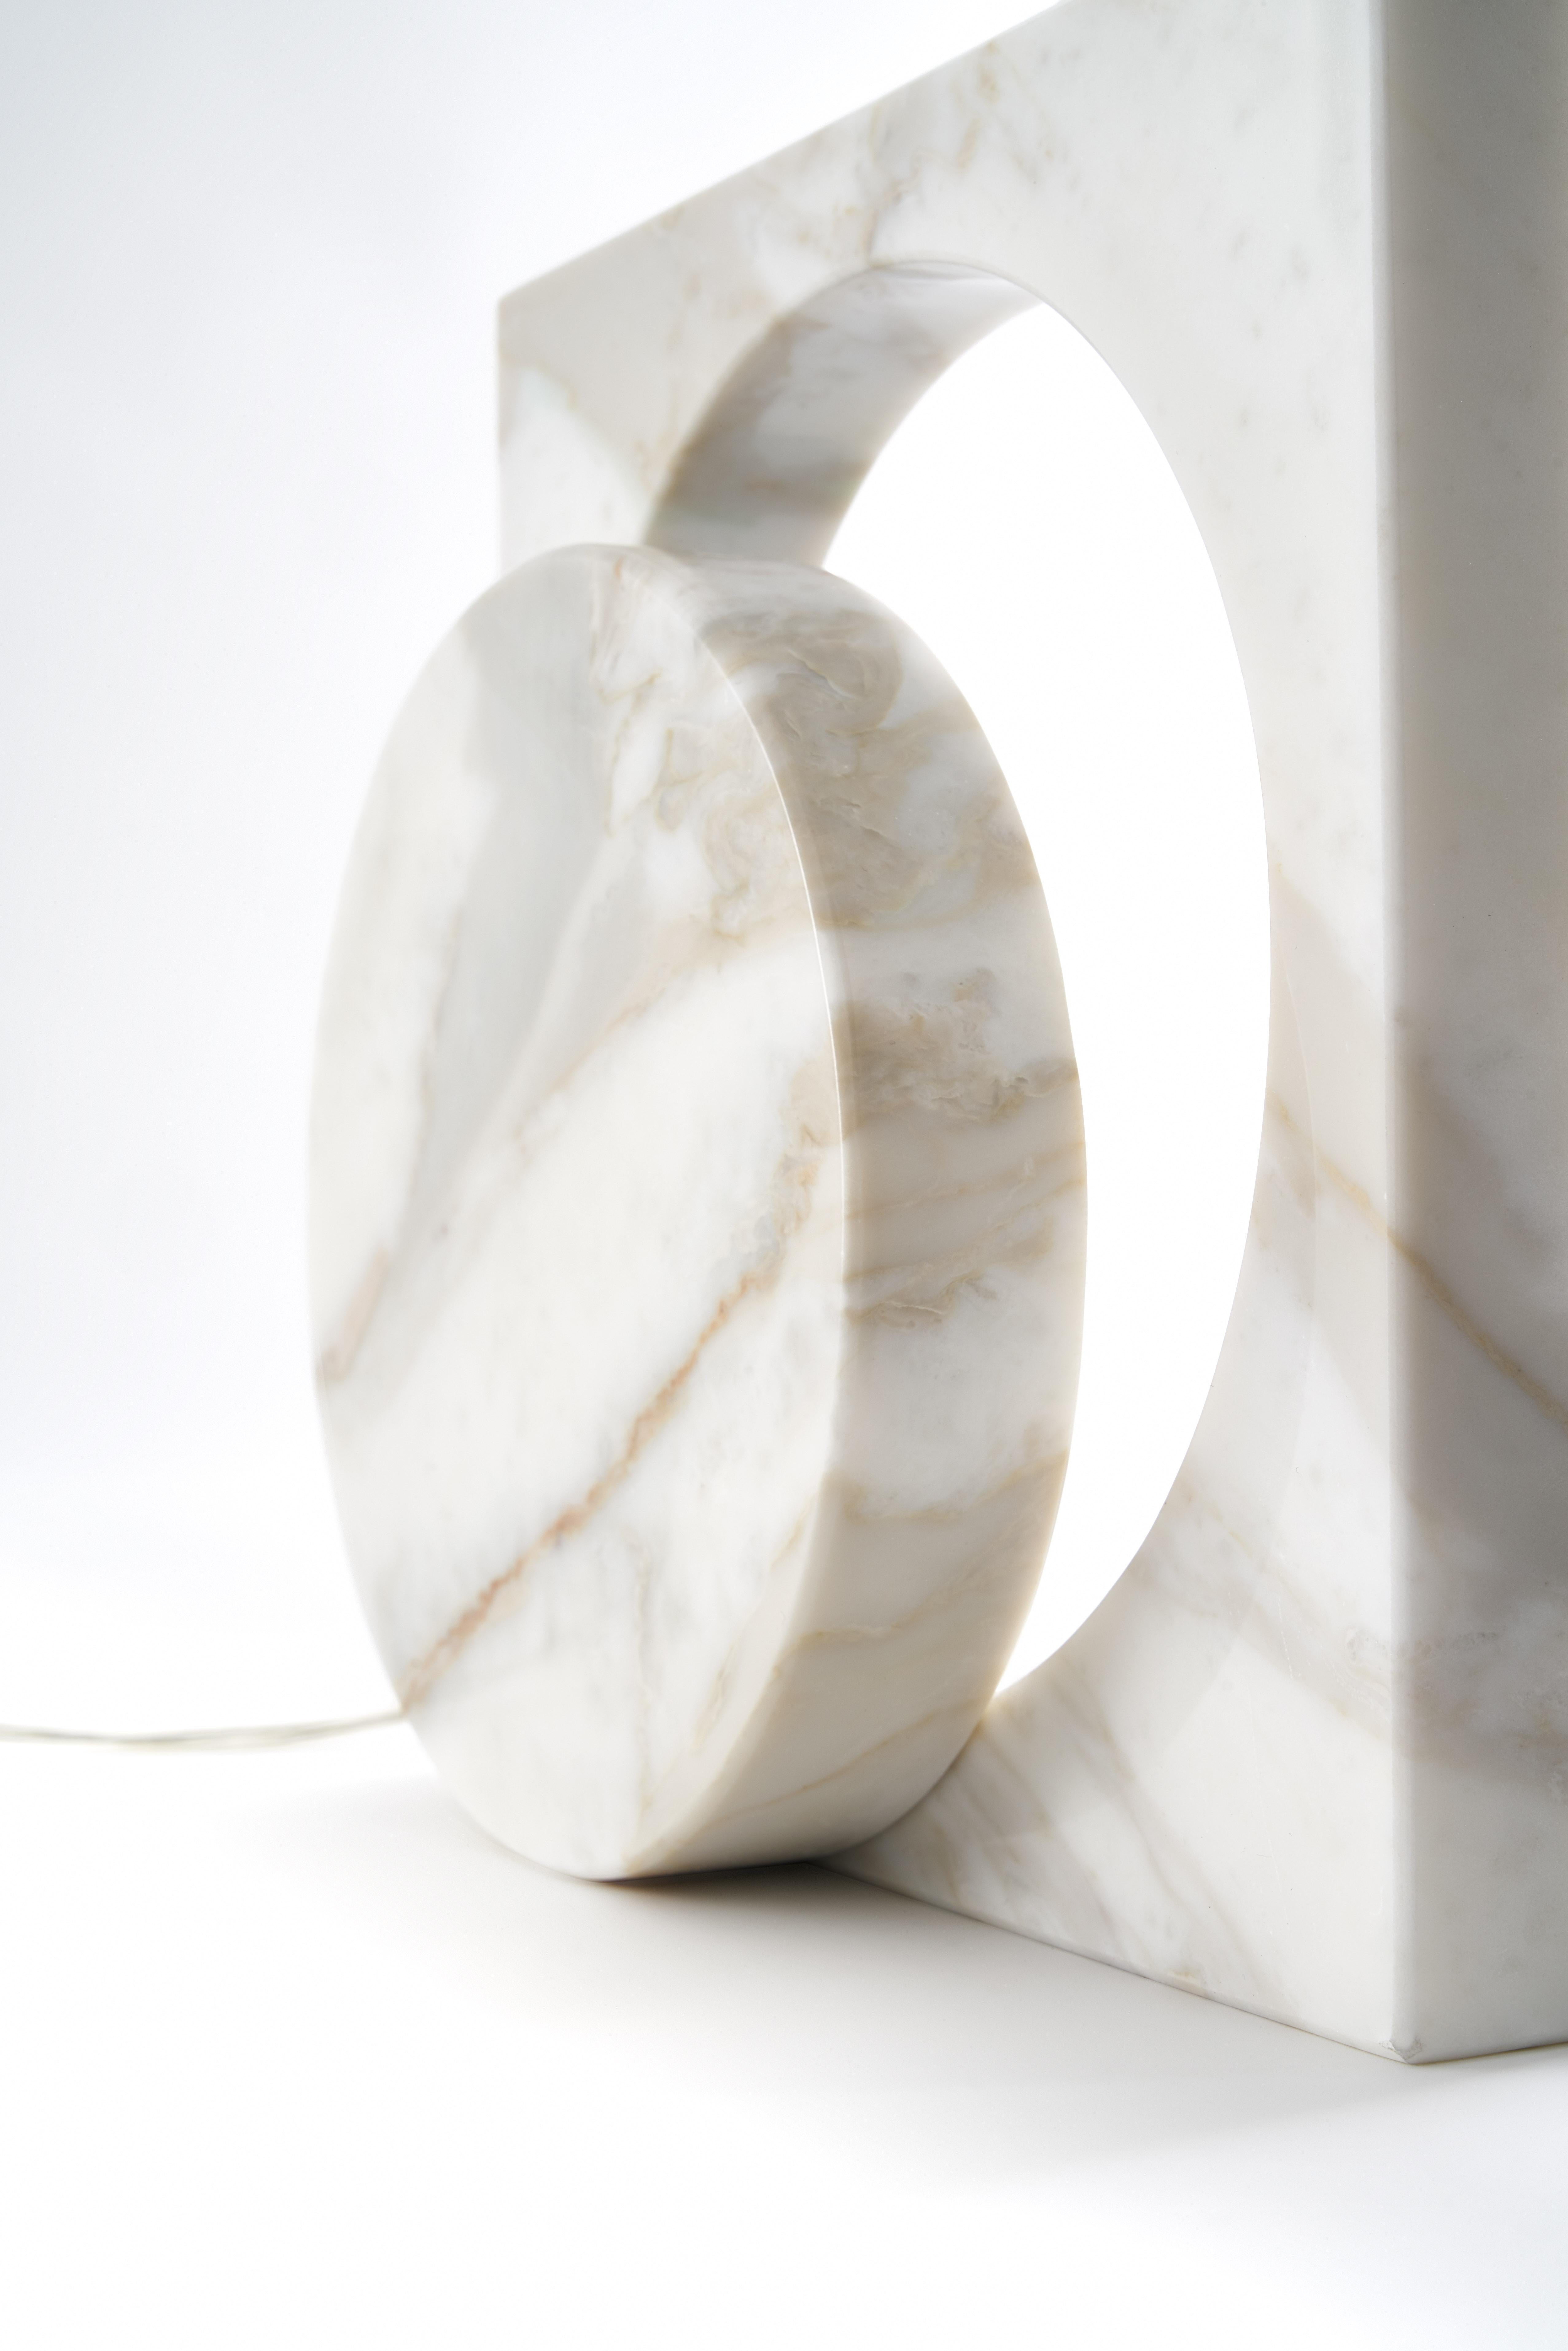 Modern Marble One Cut Moon Table Lamp, Moreno Ratti For Sale